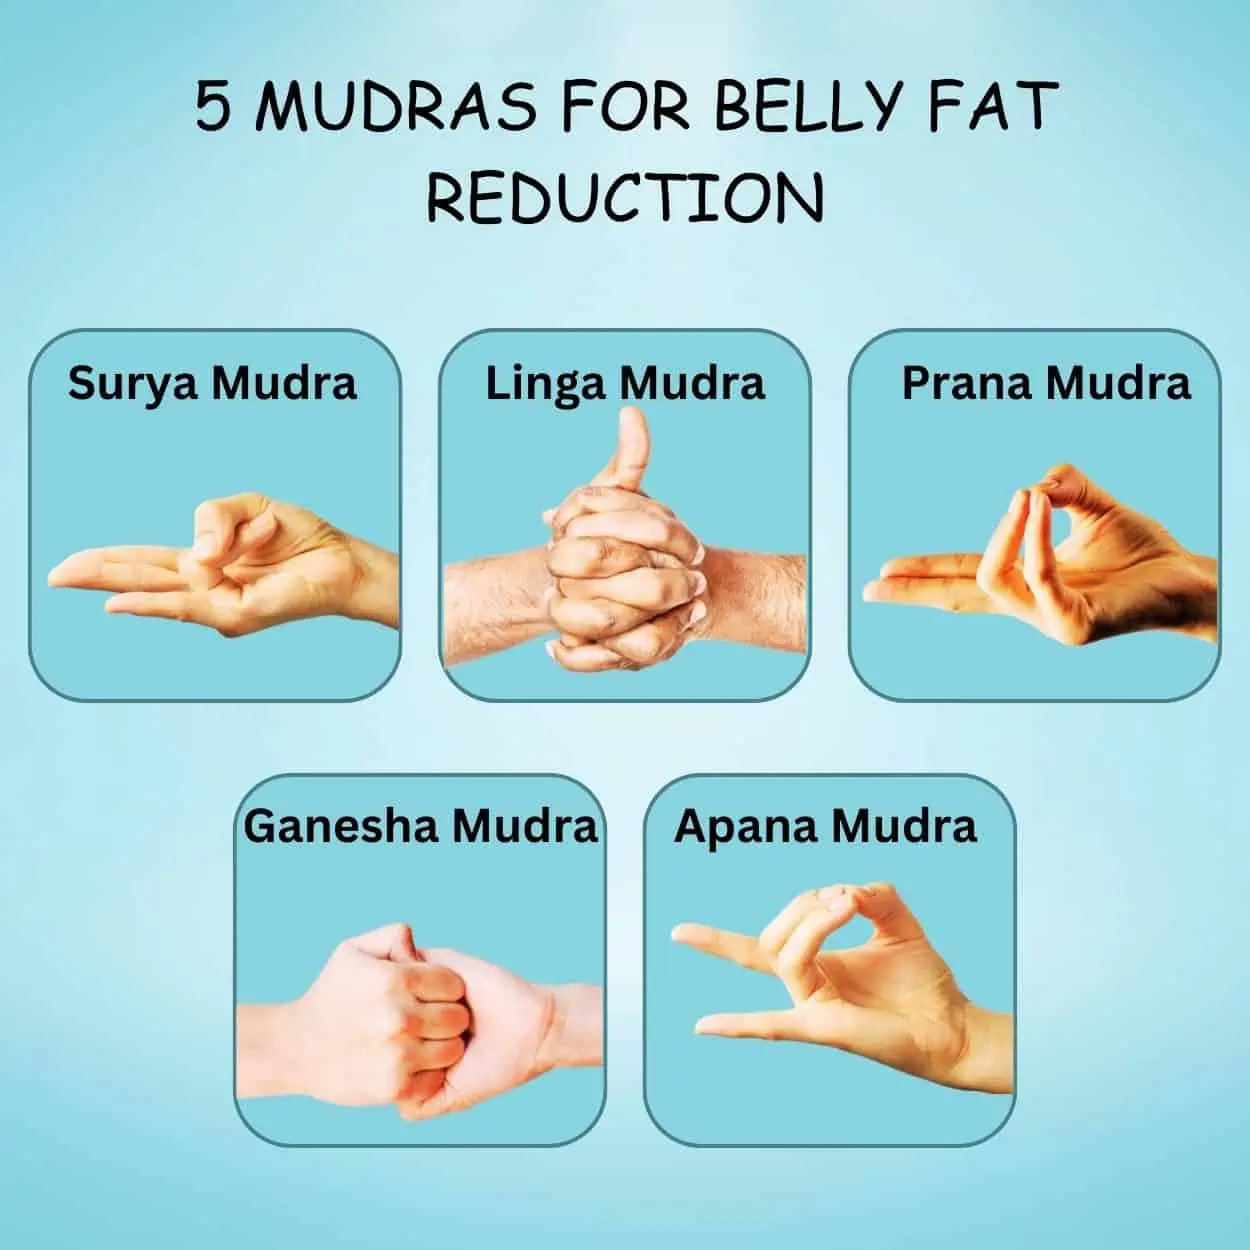 Mudras for Belly Fat Reduction